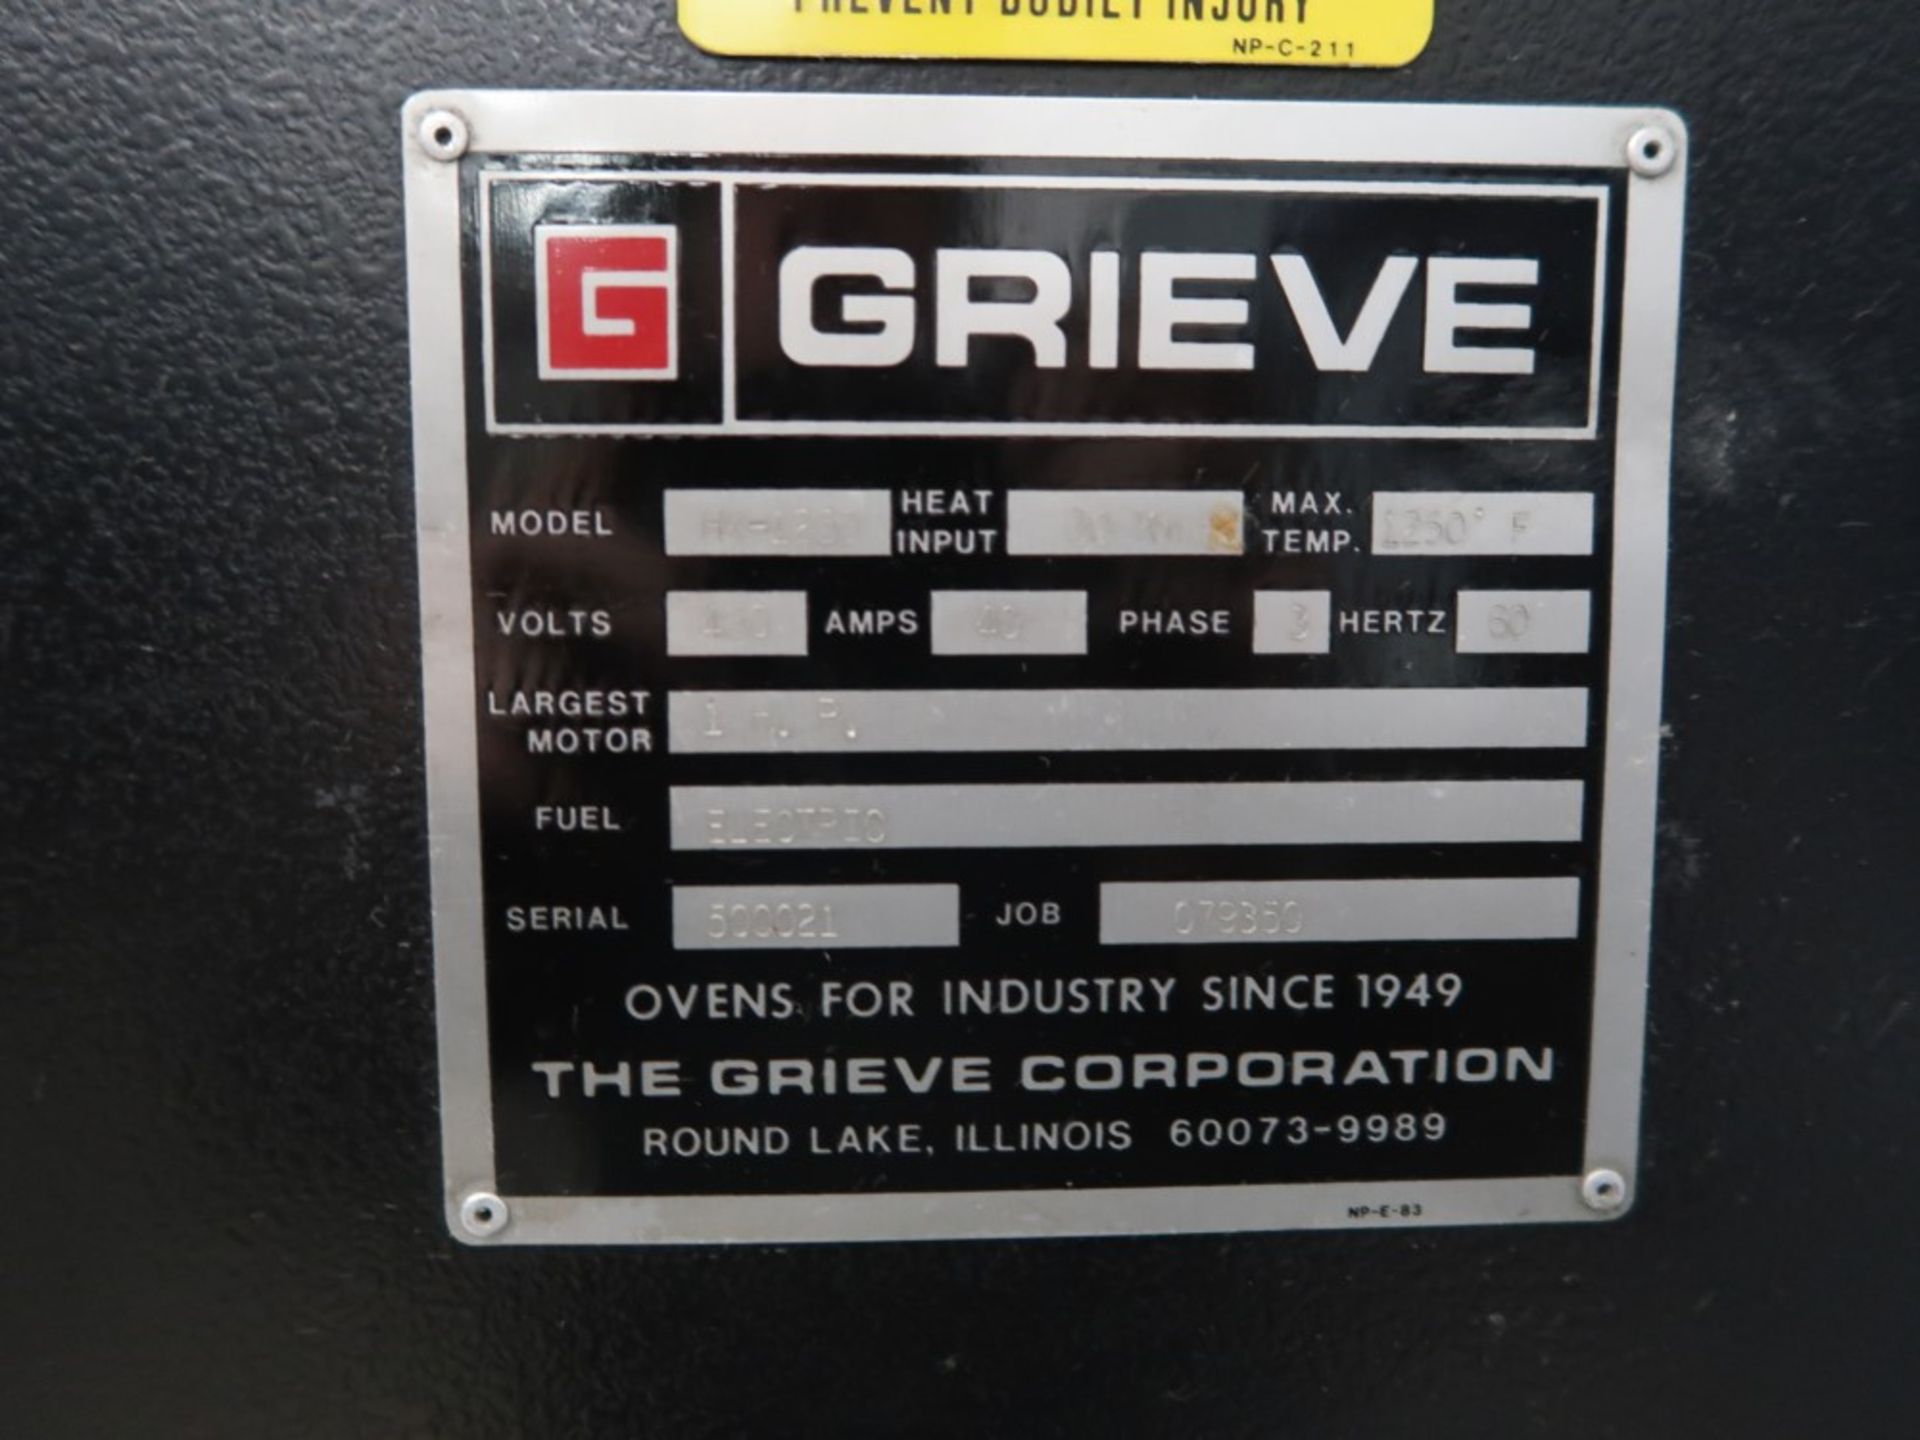 Grieve Model HX-1250 Electric Oven S/N 500021, 37" W x 26" H x 19" D, Max Temp 1250 Degrees F w/ (4) - Image 7 of 7